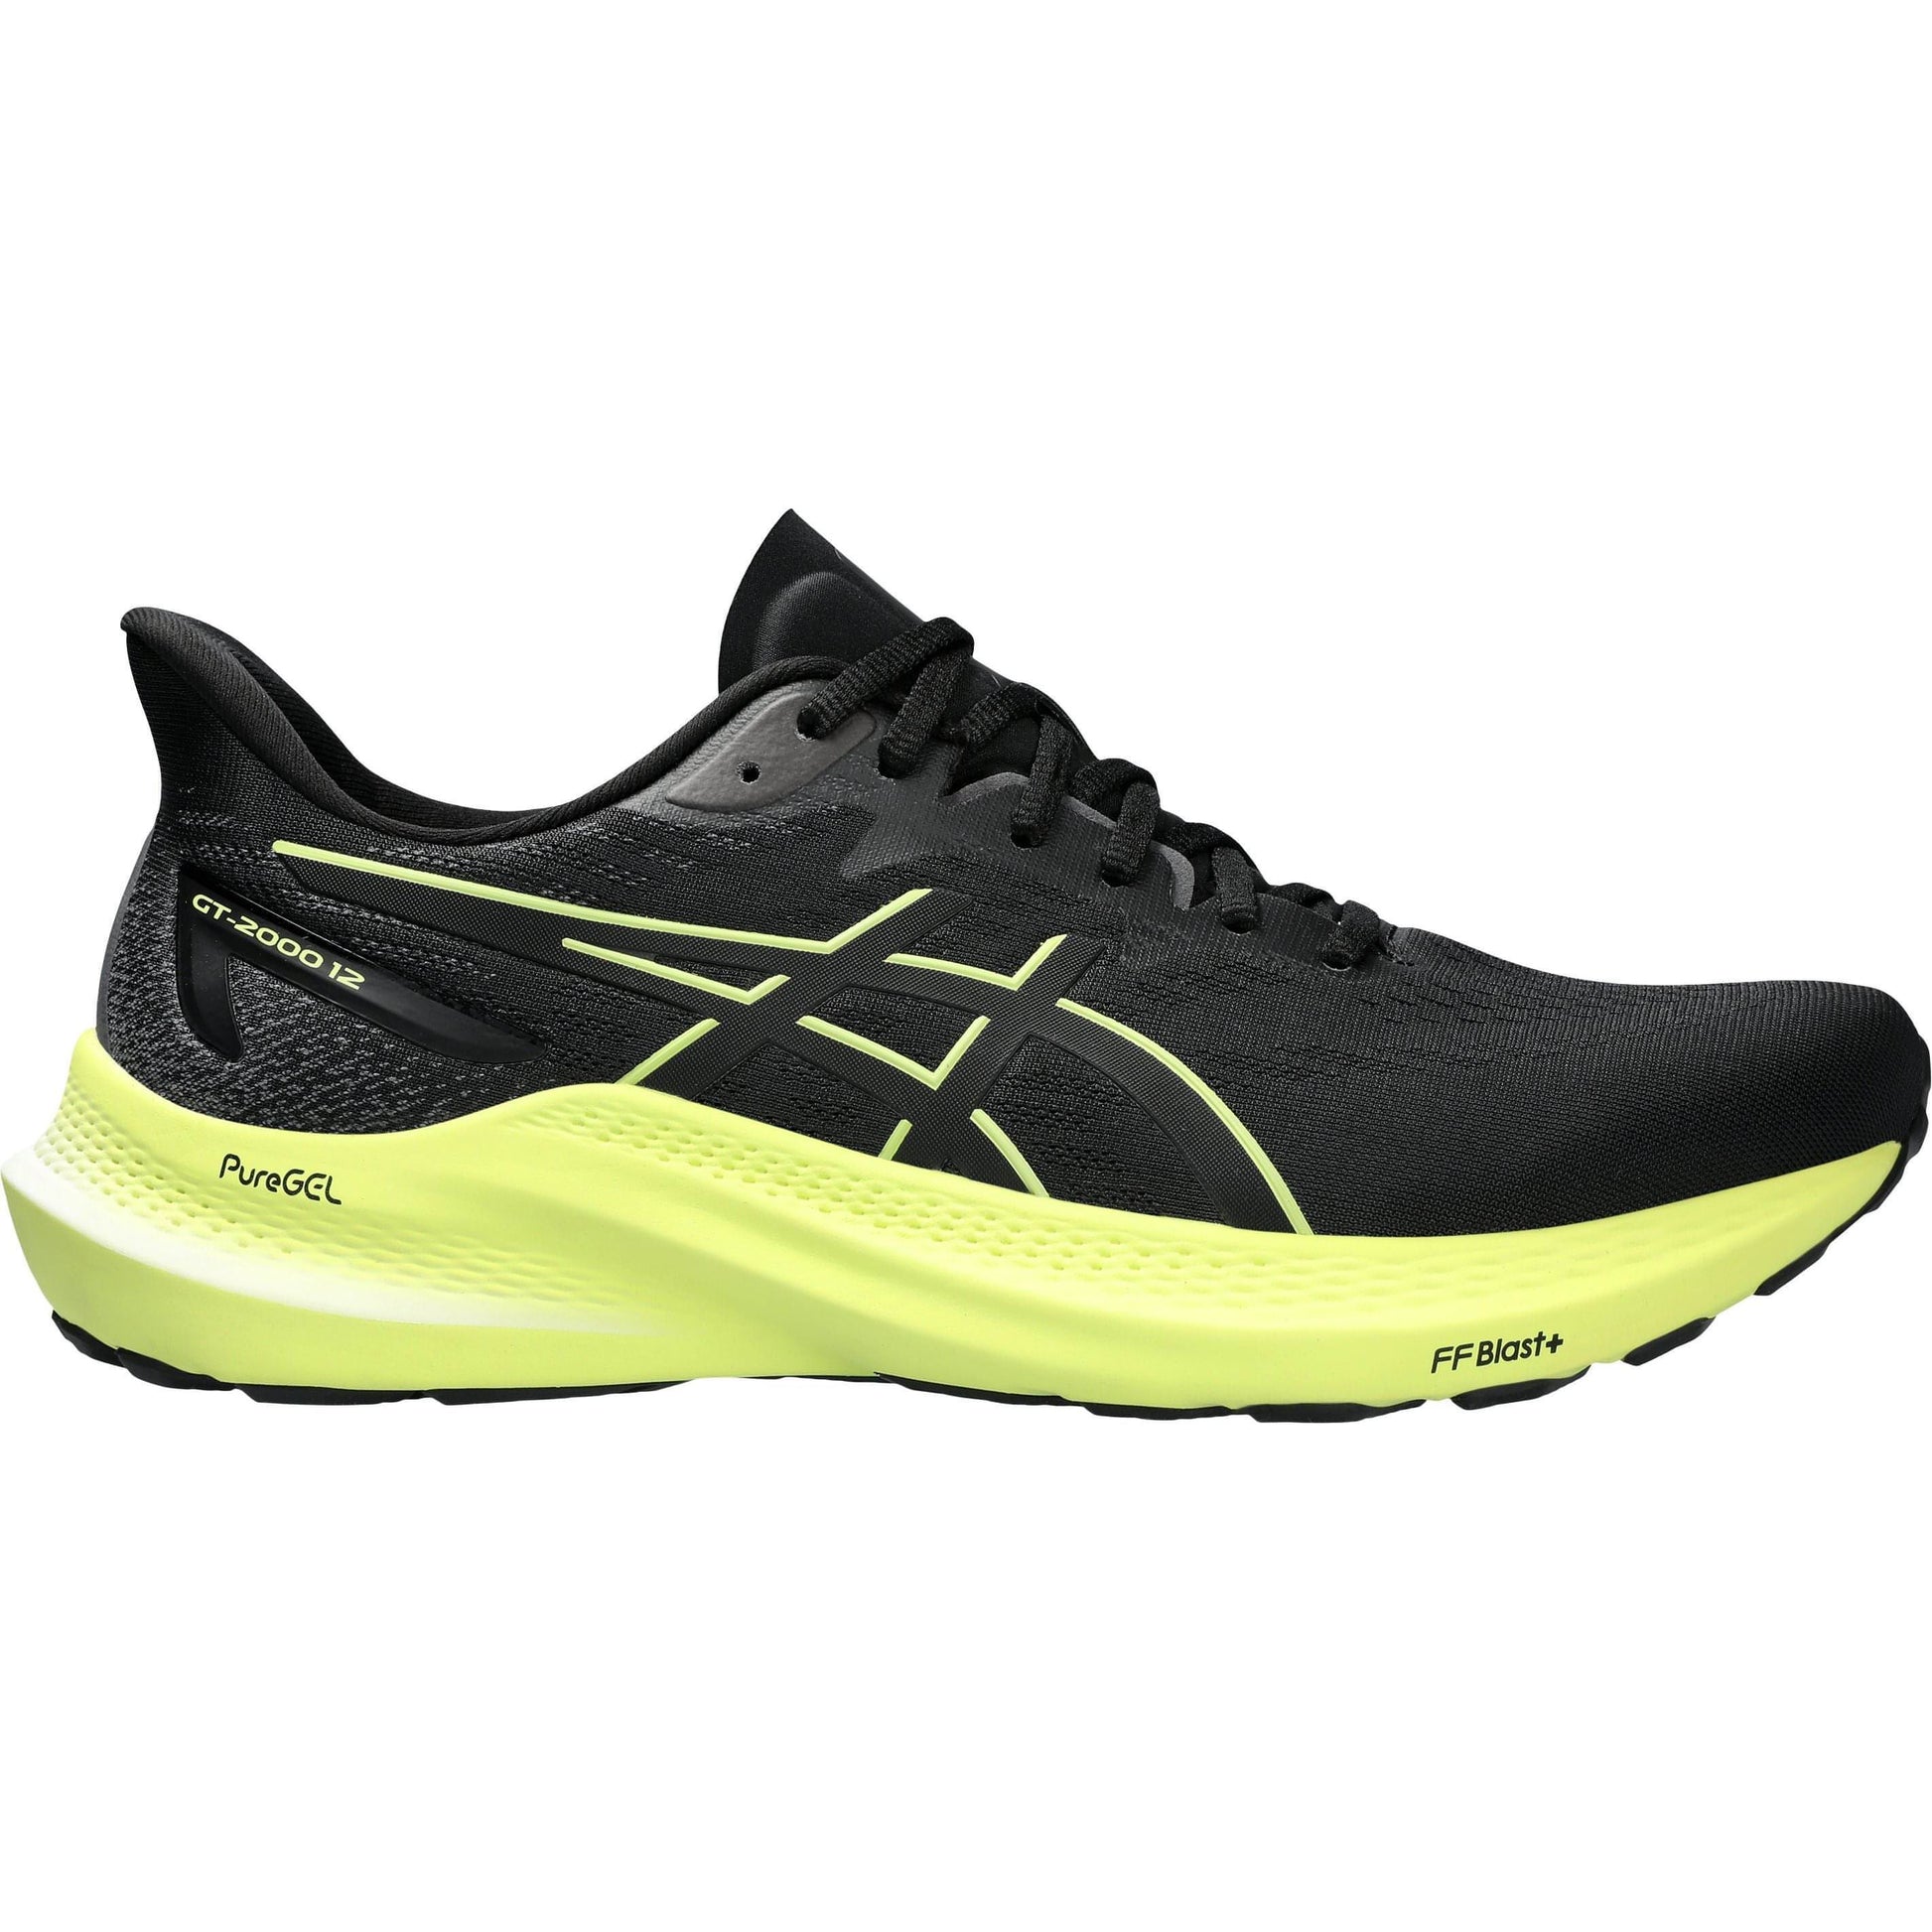 ASICS GT-2000 12 running shoes in black and neon yellow colorway, featuring dynamic duomax support system, engineered mesh upper, and flytefoam technology for enhanced stability and comfort.